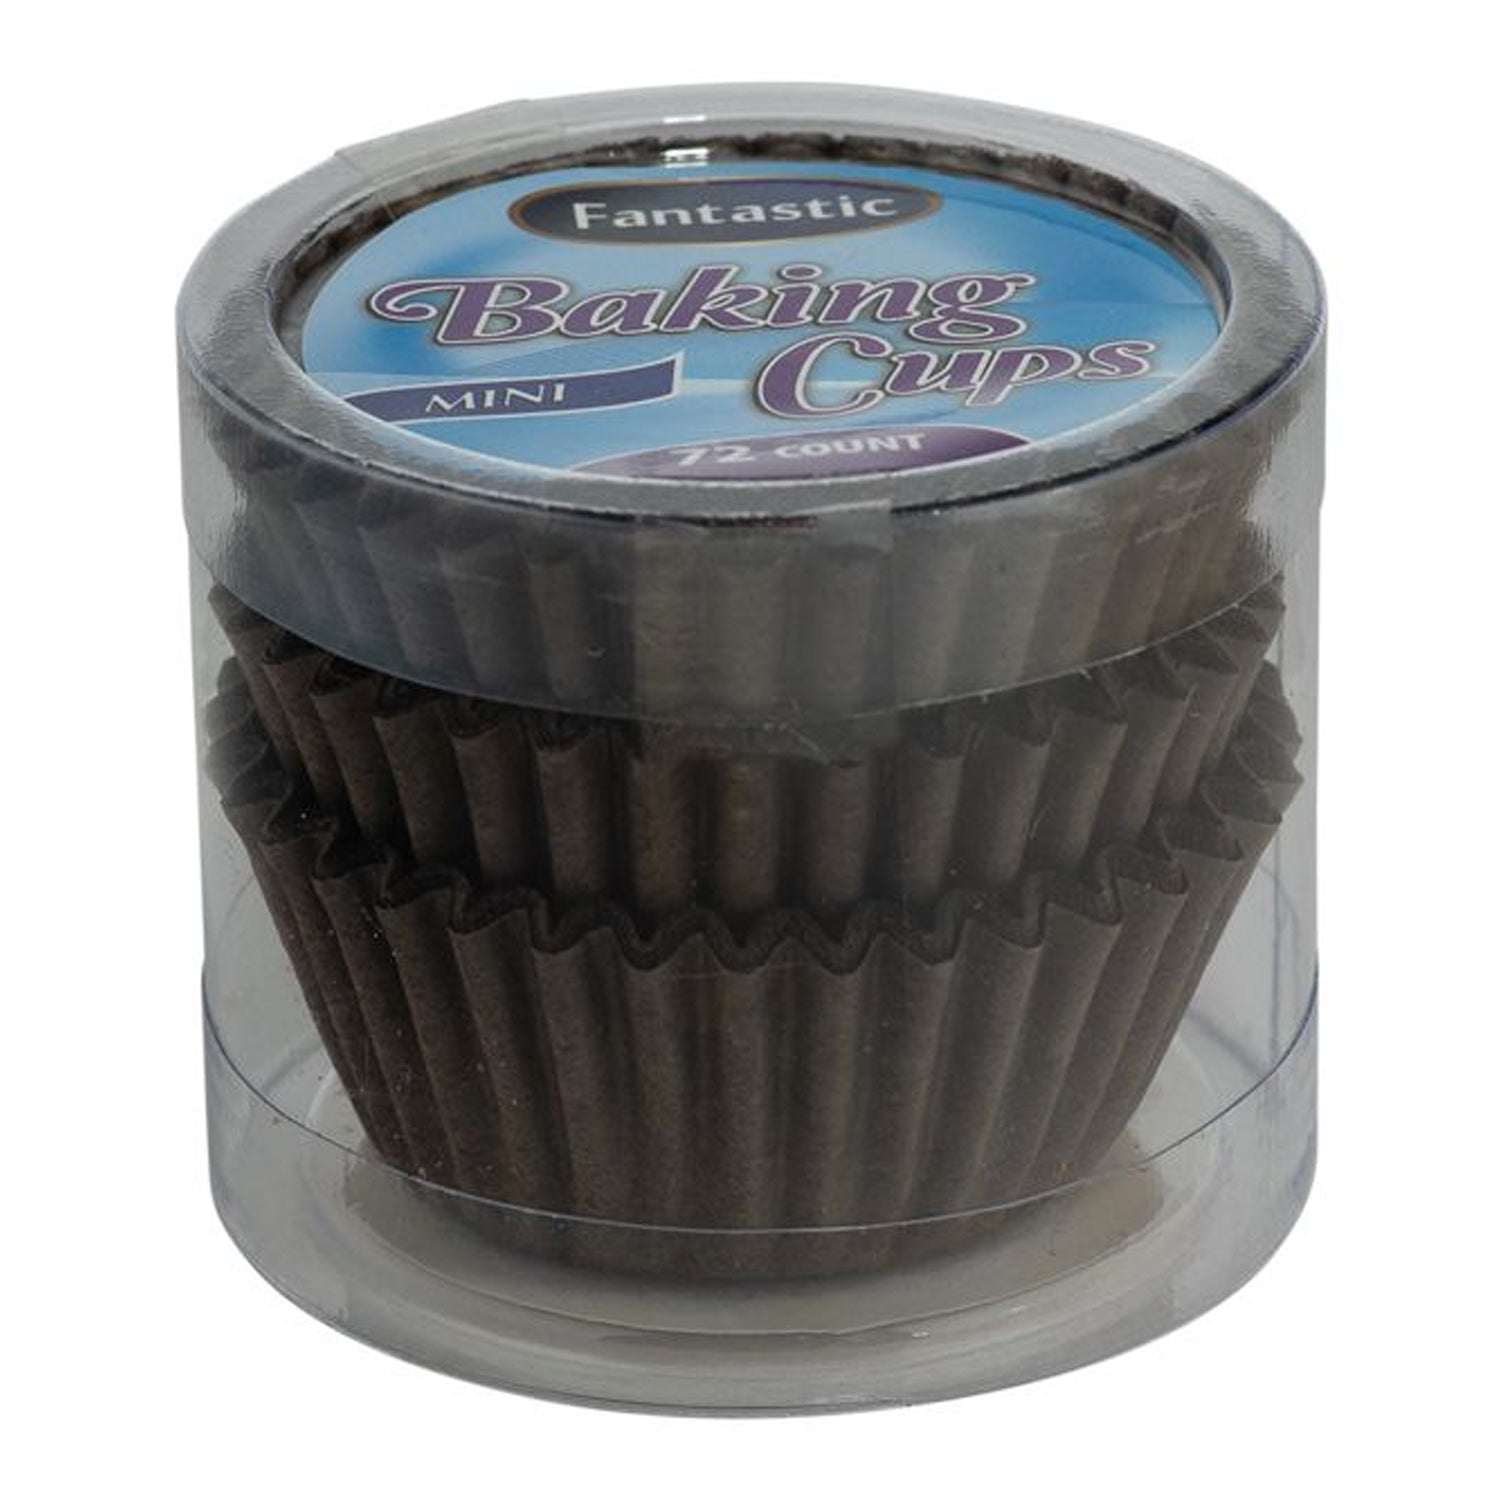 Reynolds Kitchens Foil Baking Cups (2 1/2 Inch) 72 Cups